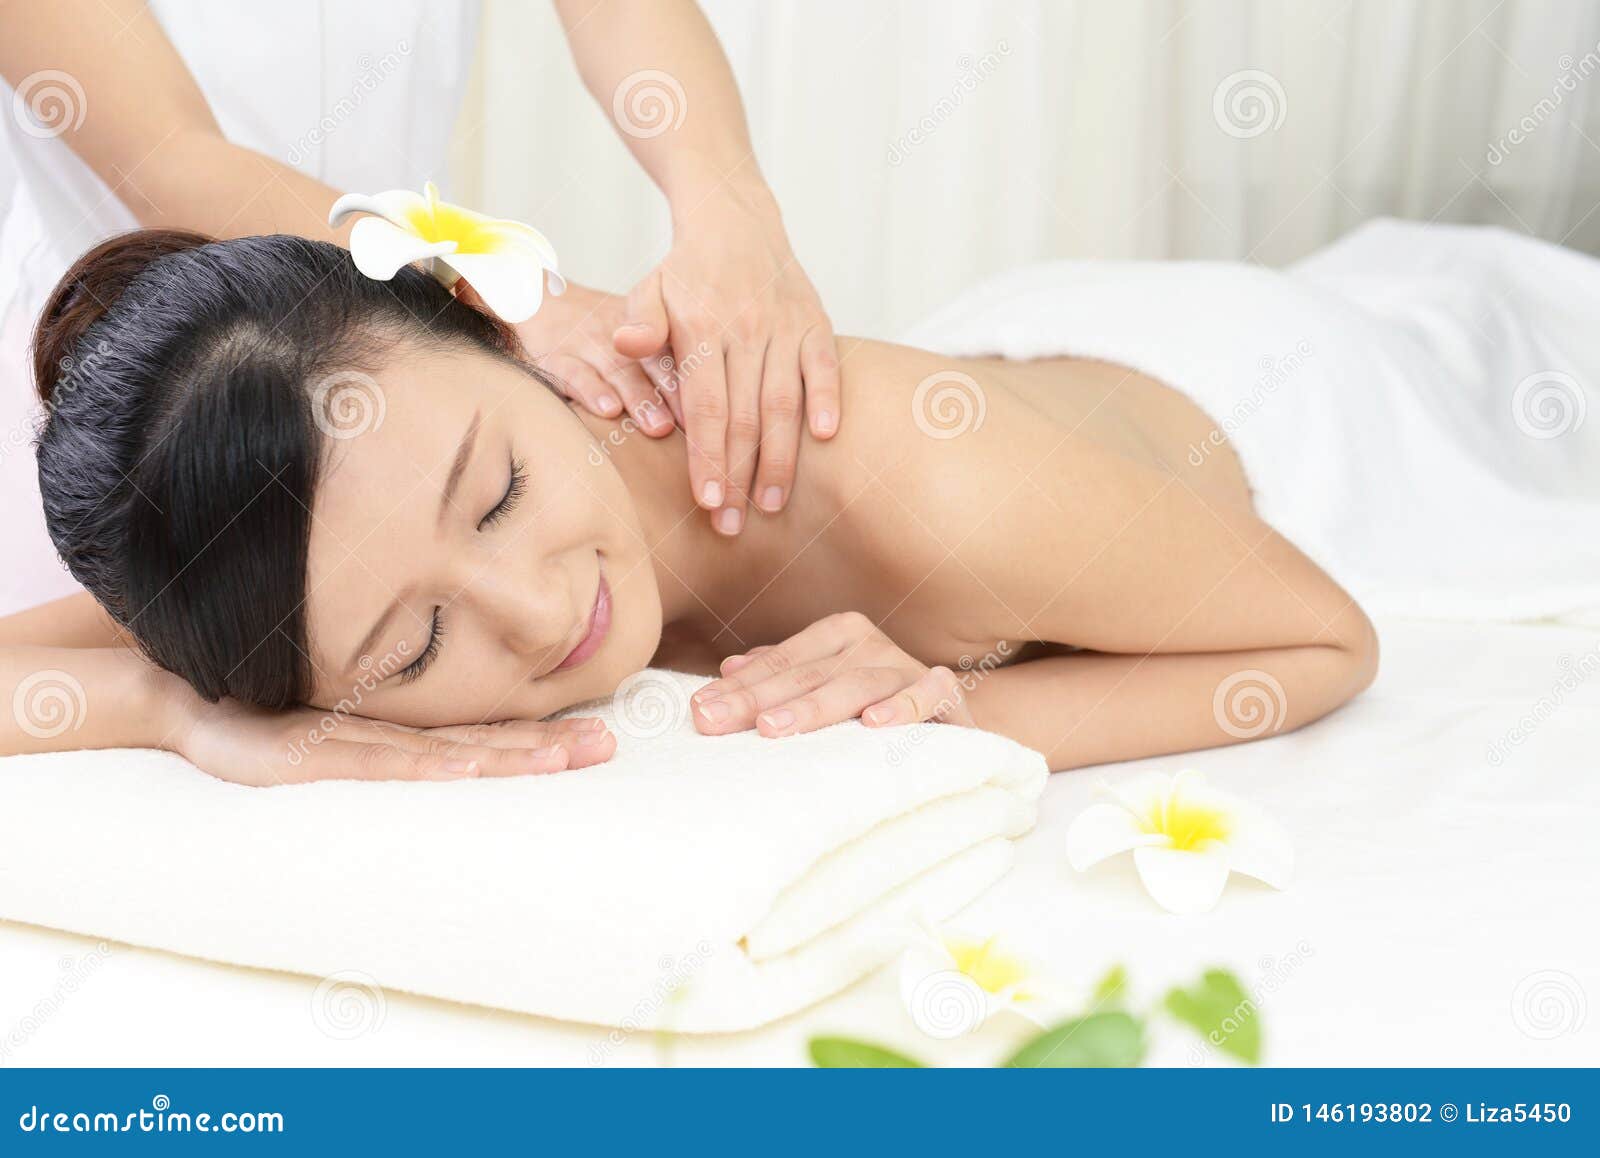 Japanese massage oil therapy photo pic photo